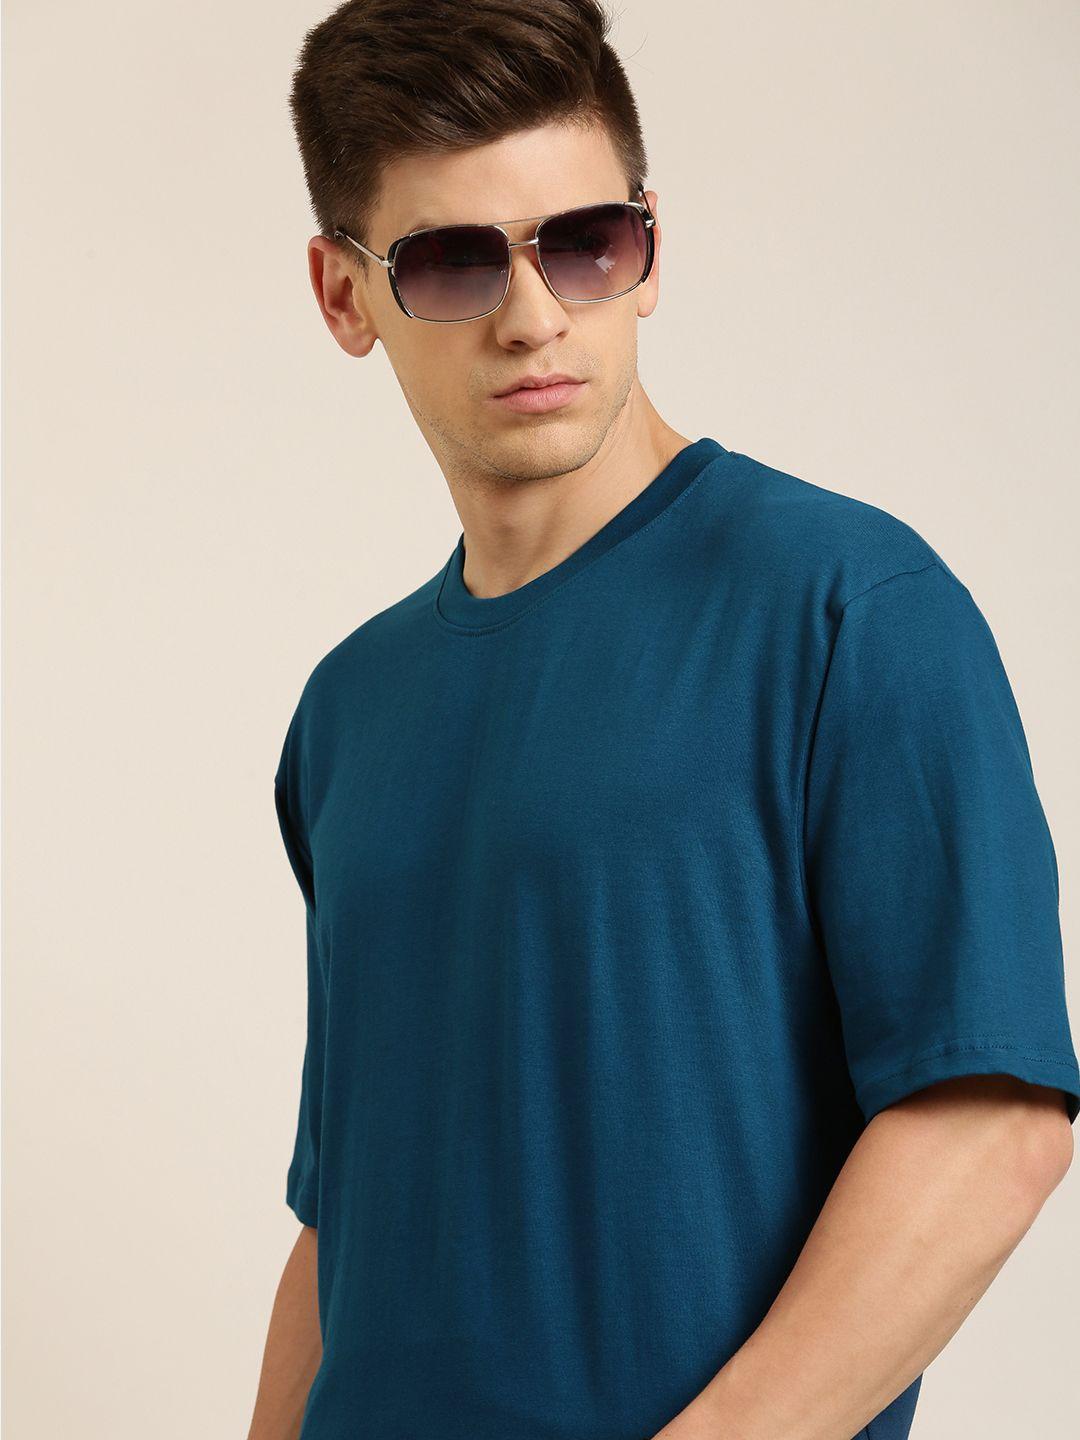 difference of opinion men teal blue pure cotton drop-shoulder loose fit oversized t-shirt